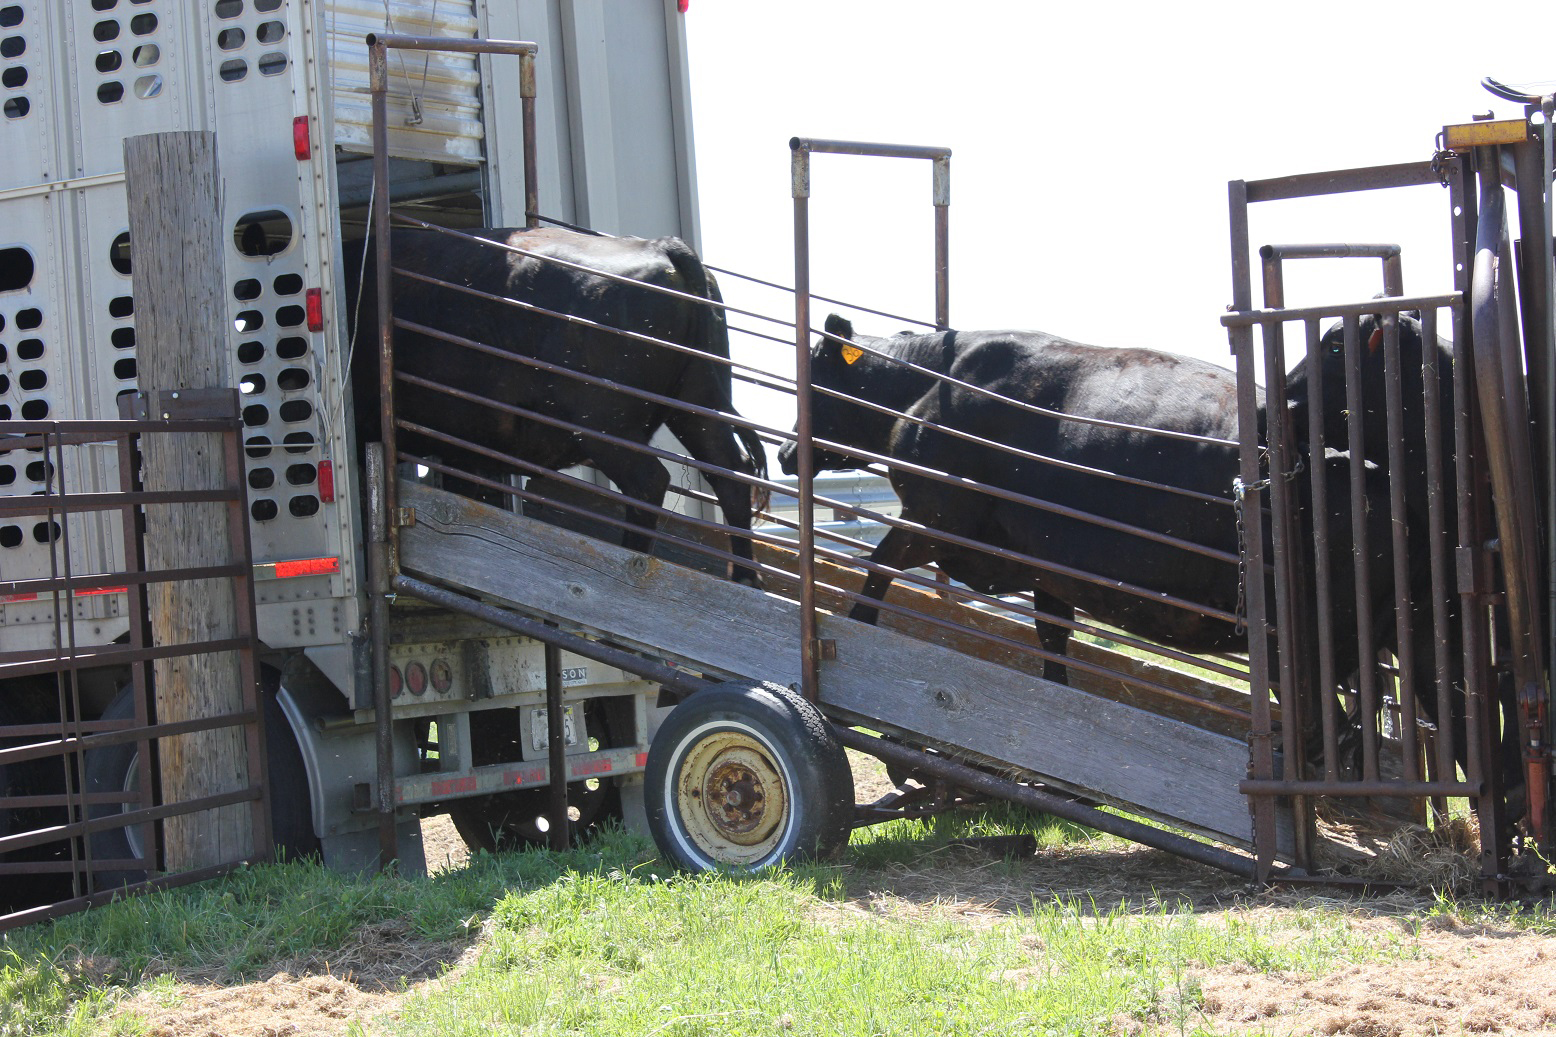 Incorporating good stockmanship during sorting, loading and unloading can assist in reducing bruising. Photo courtesy of Troy Walz.